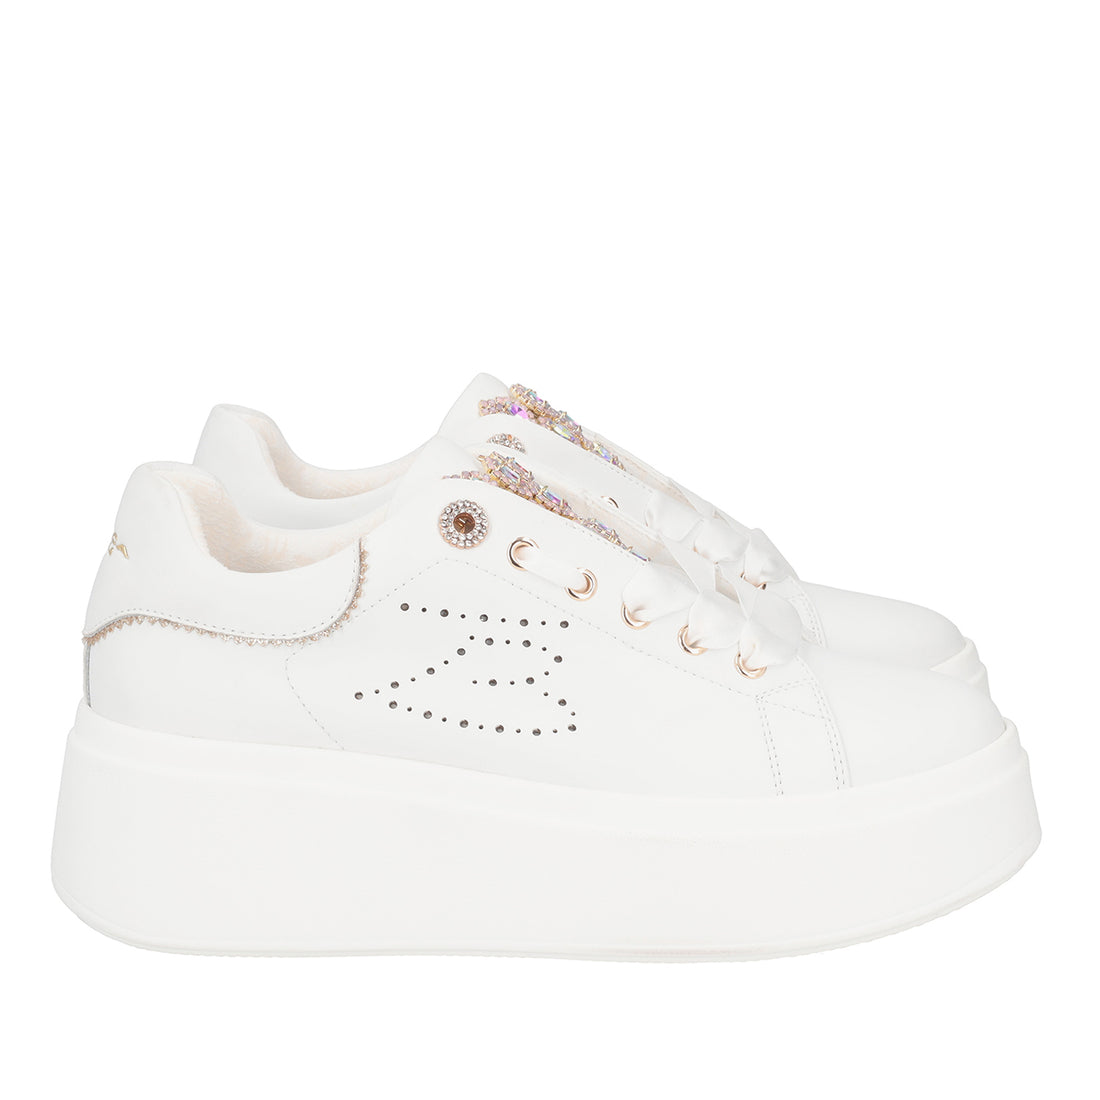 WHITE VANITY SNEAKER IN LEATHER WITH JEWEL ACCESSORY